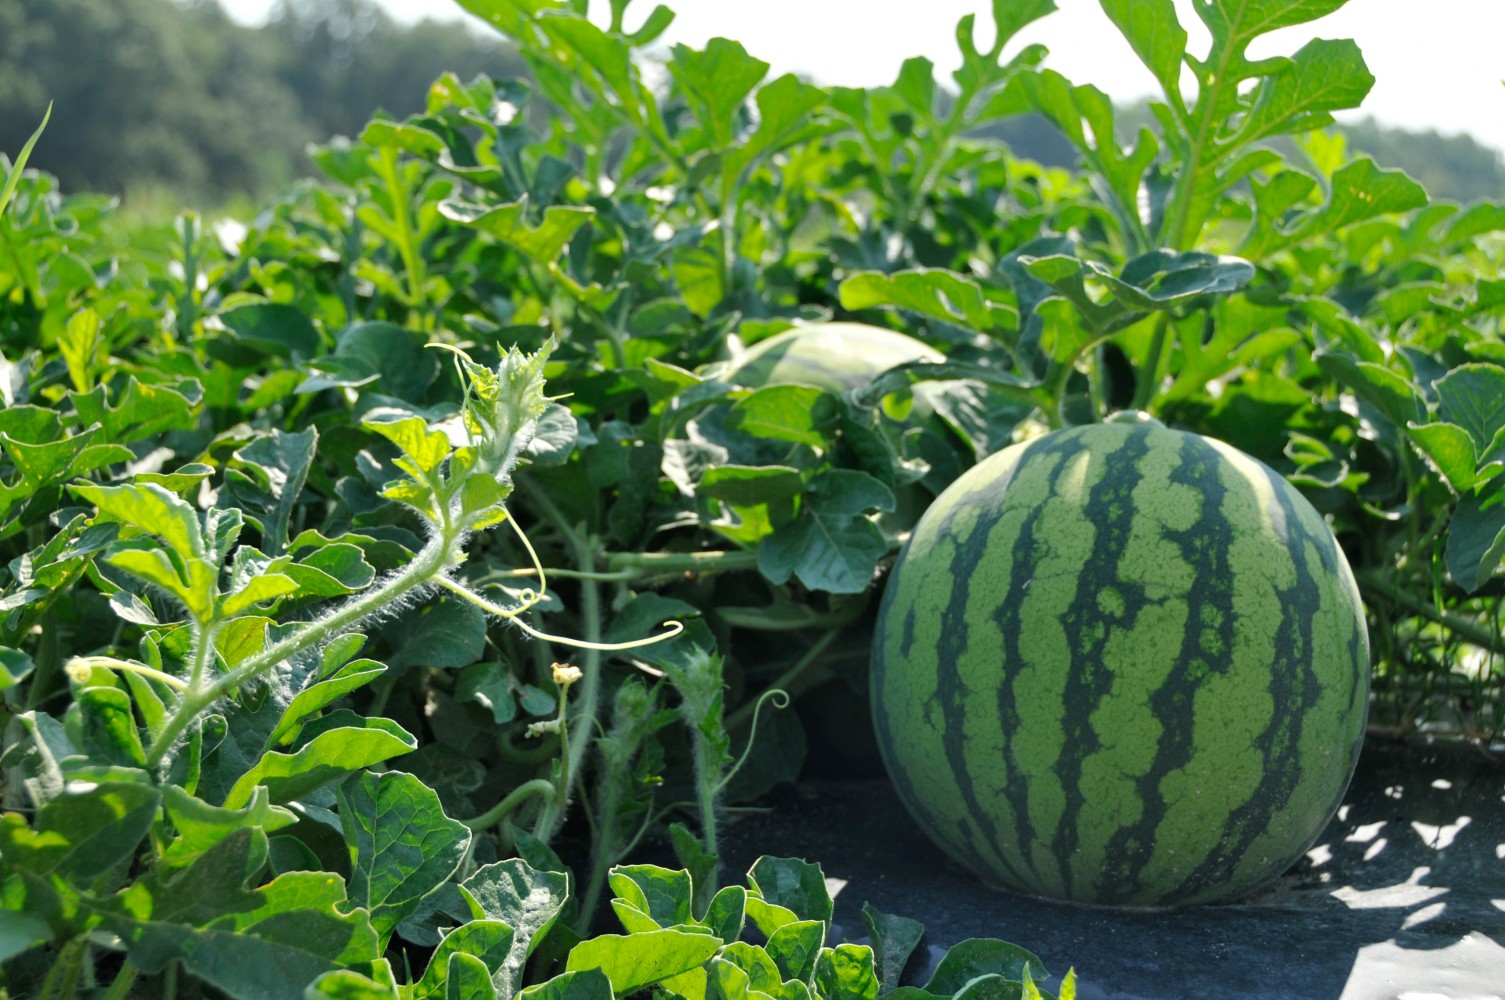 How to Growing and Harvesting Watermelon